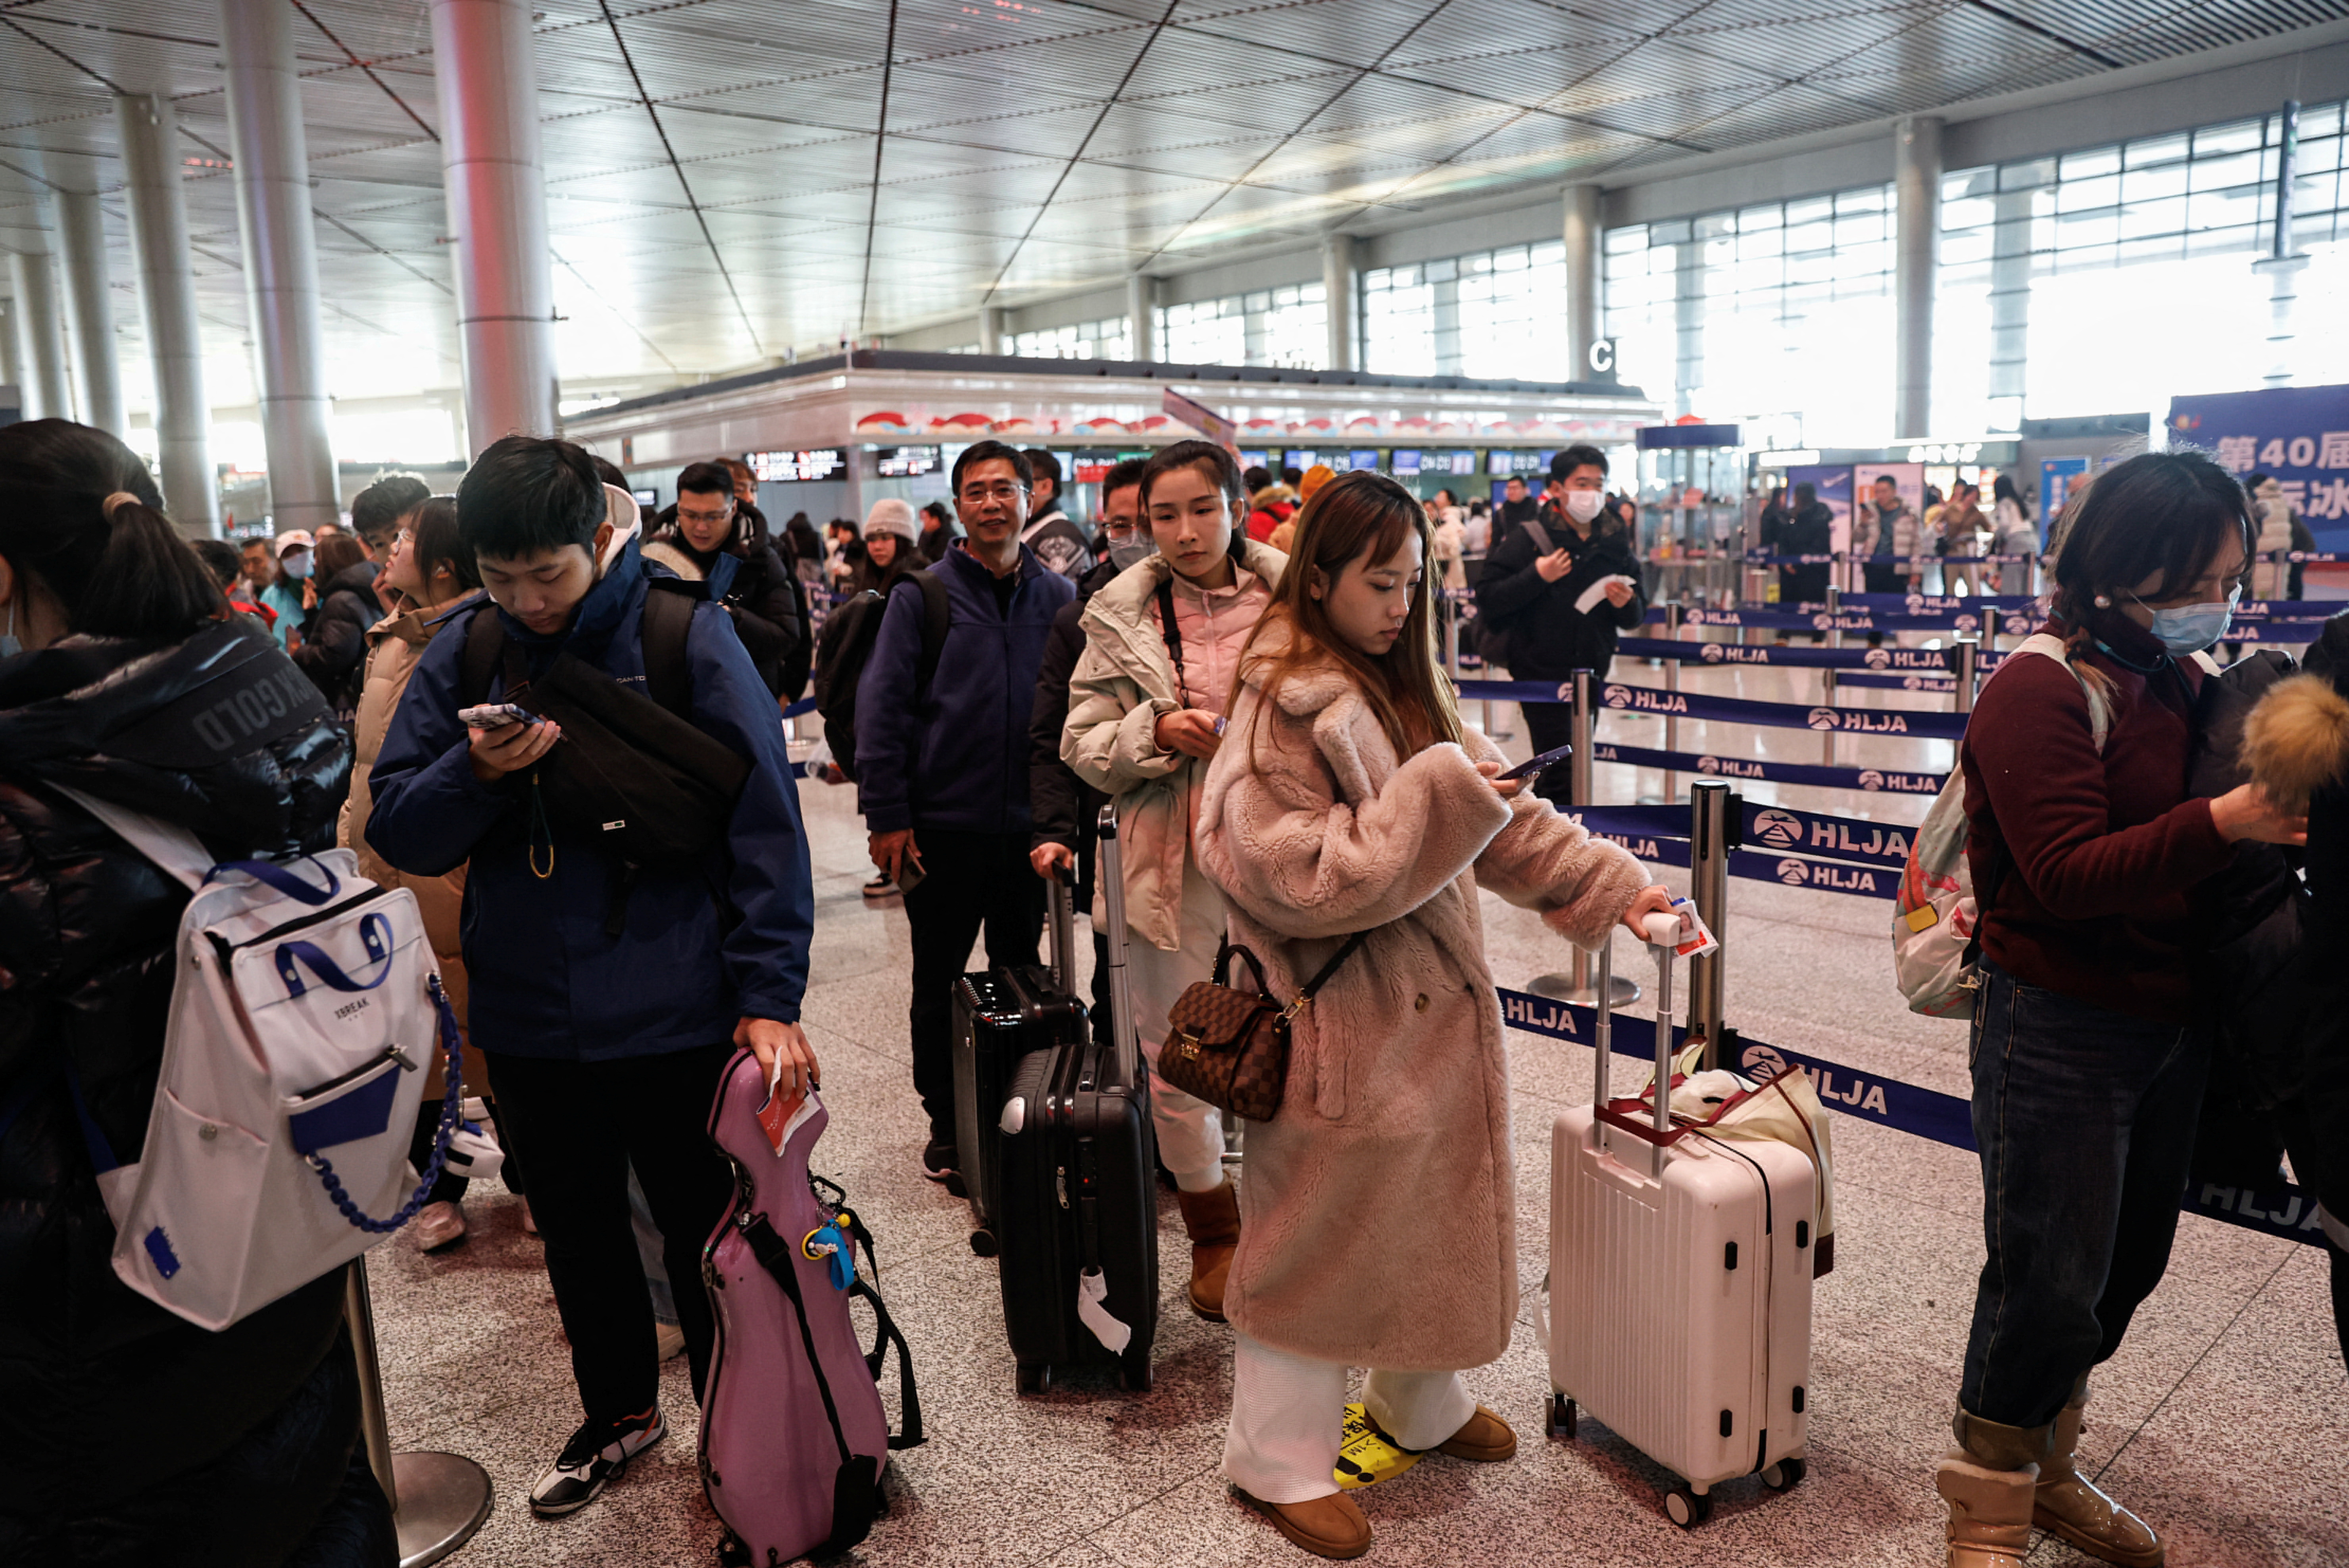 People wait in line to go through the security check at an airport in Harbin